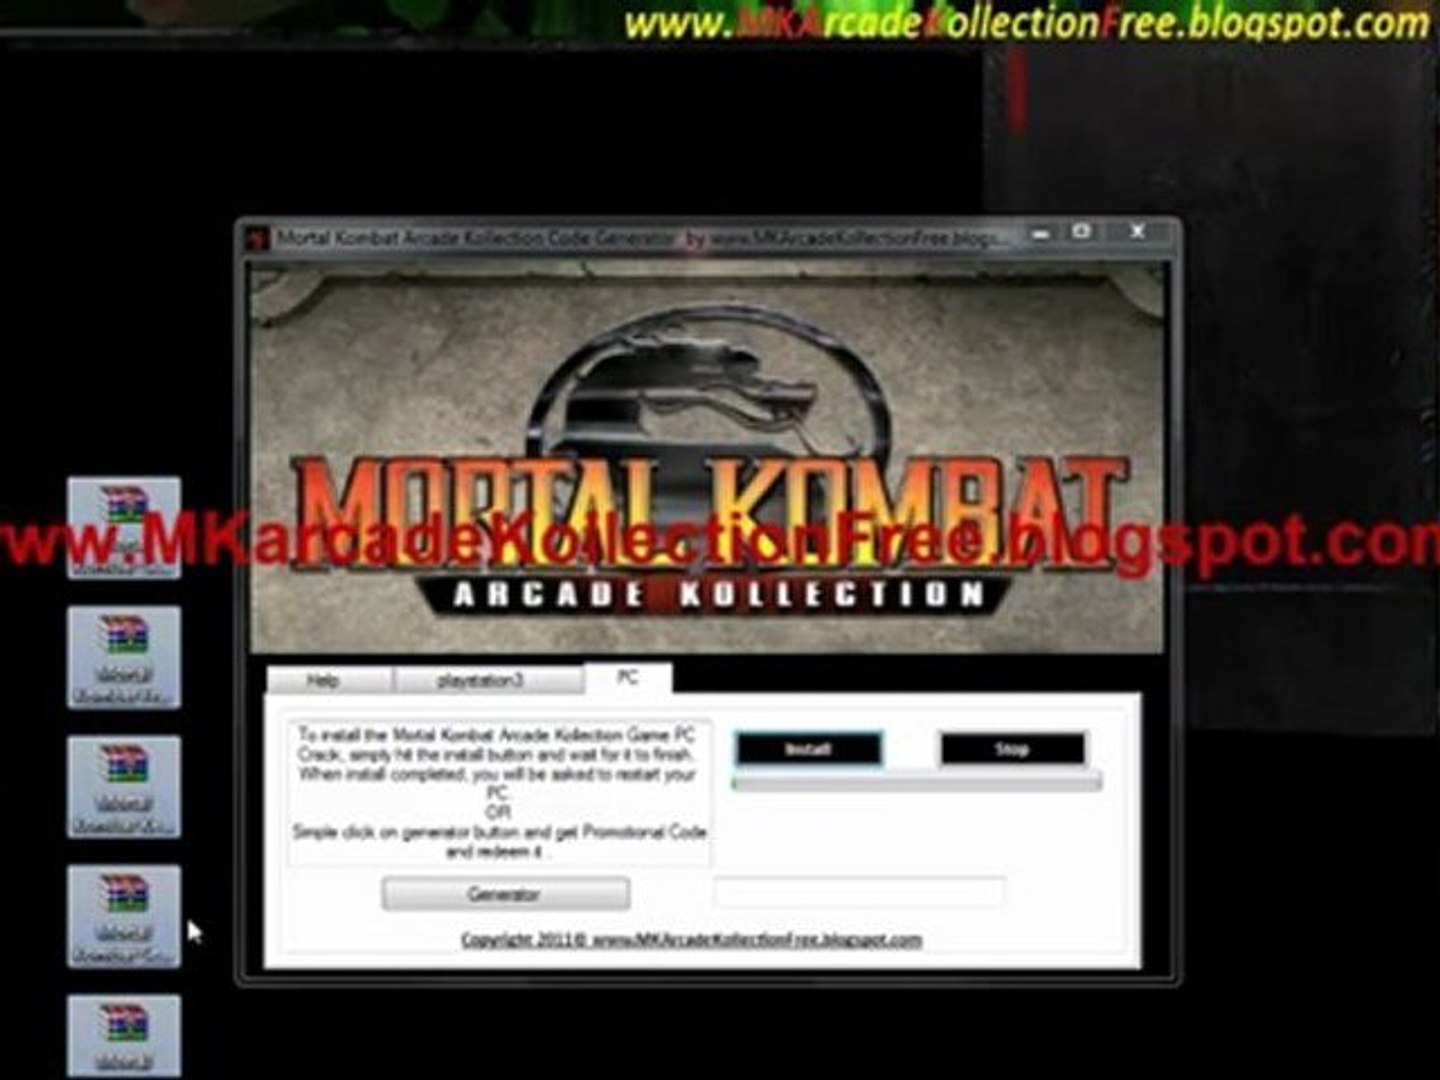 Mortal Kombat Arcade Kollection Crack by Skidrow for PC